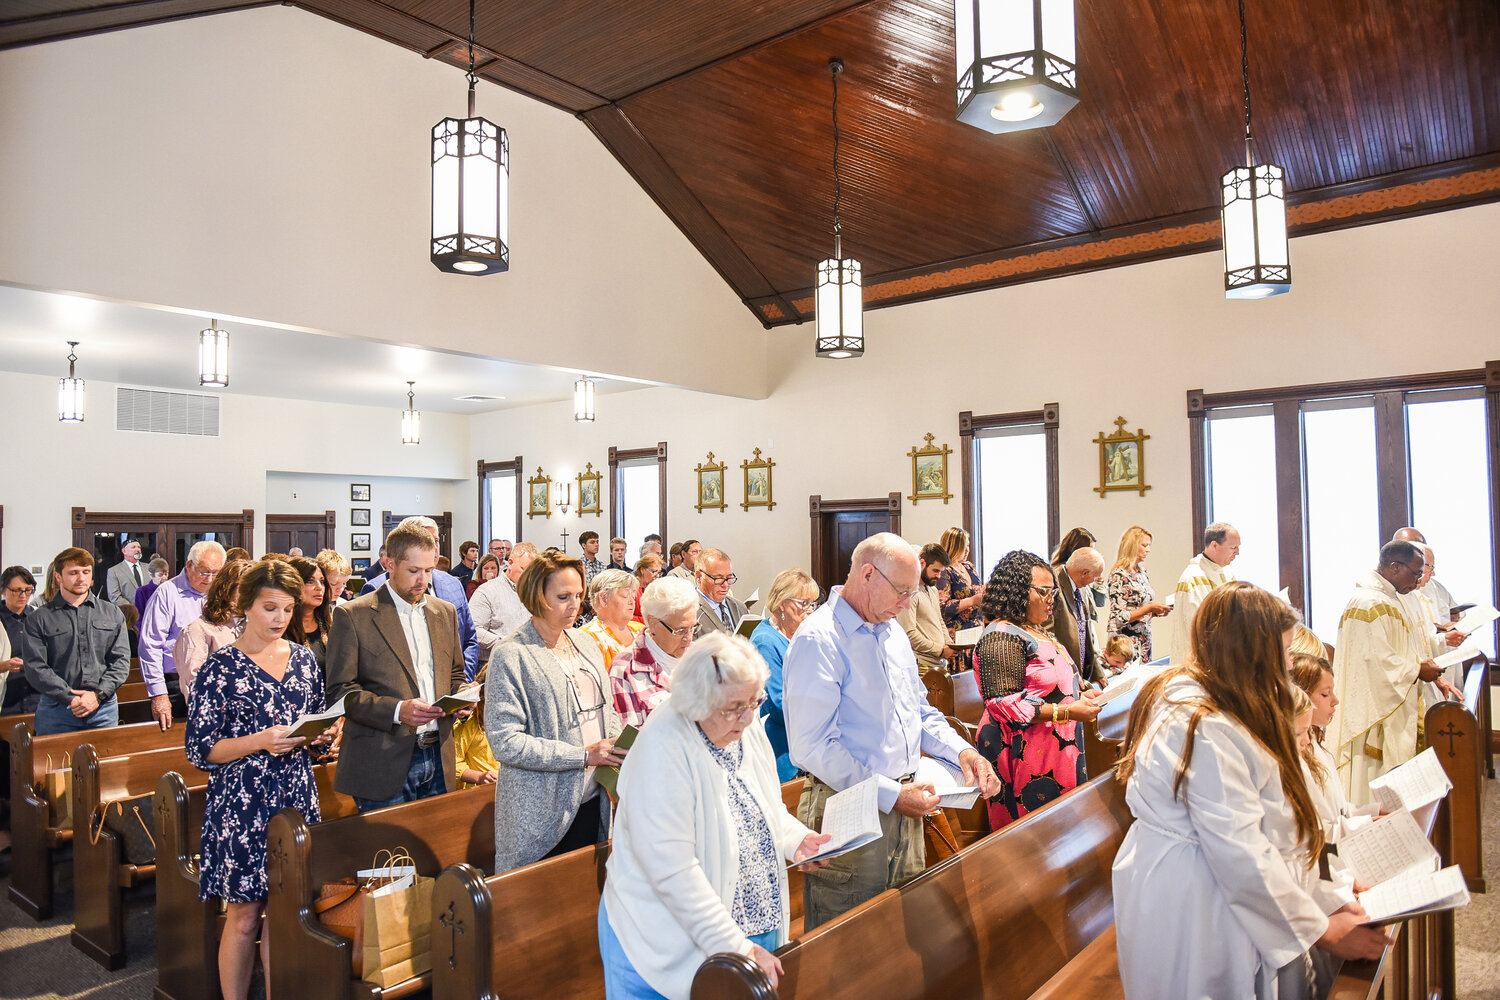 Members of St. Jude Thaddeus Parish in Mokane participate in the Rededication Mass for their church with Bishop W. Shawn McKnight on Oct. 22. The rededication capped a year’s worth of renovations to the 1895-vintage church. Photo by Annie Williams